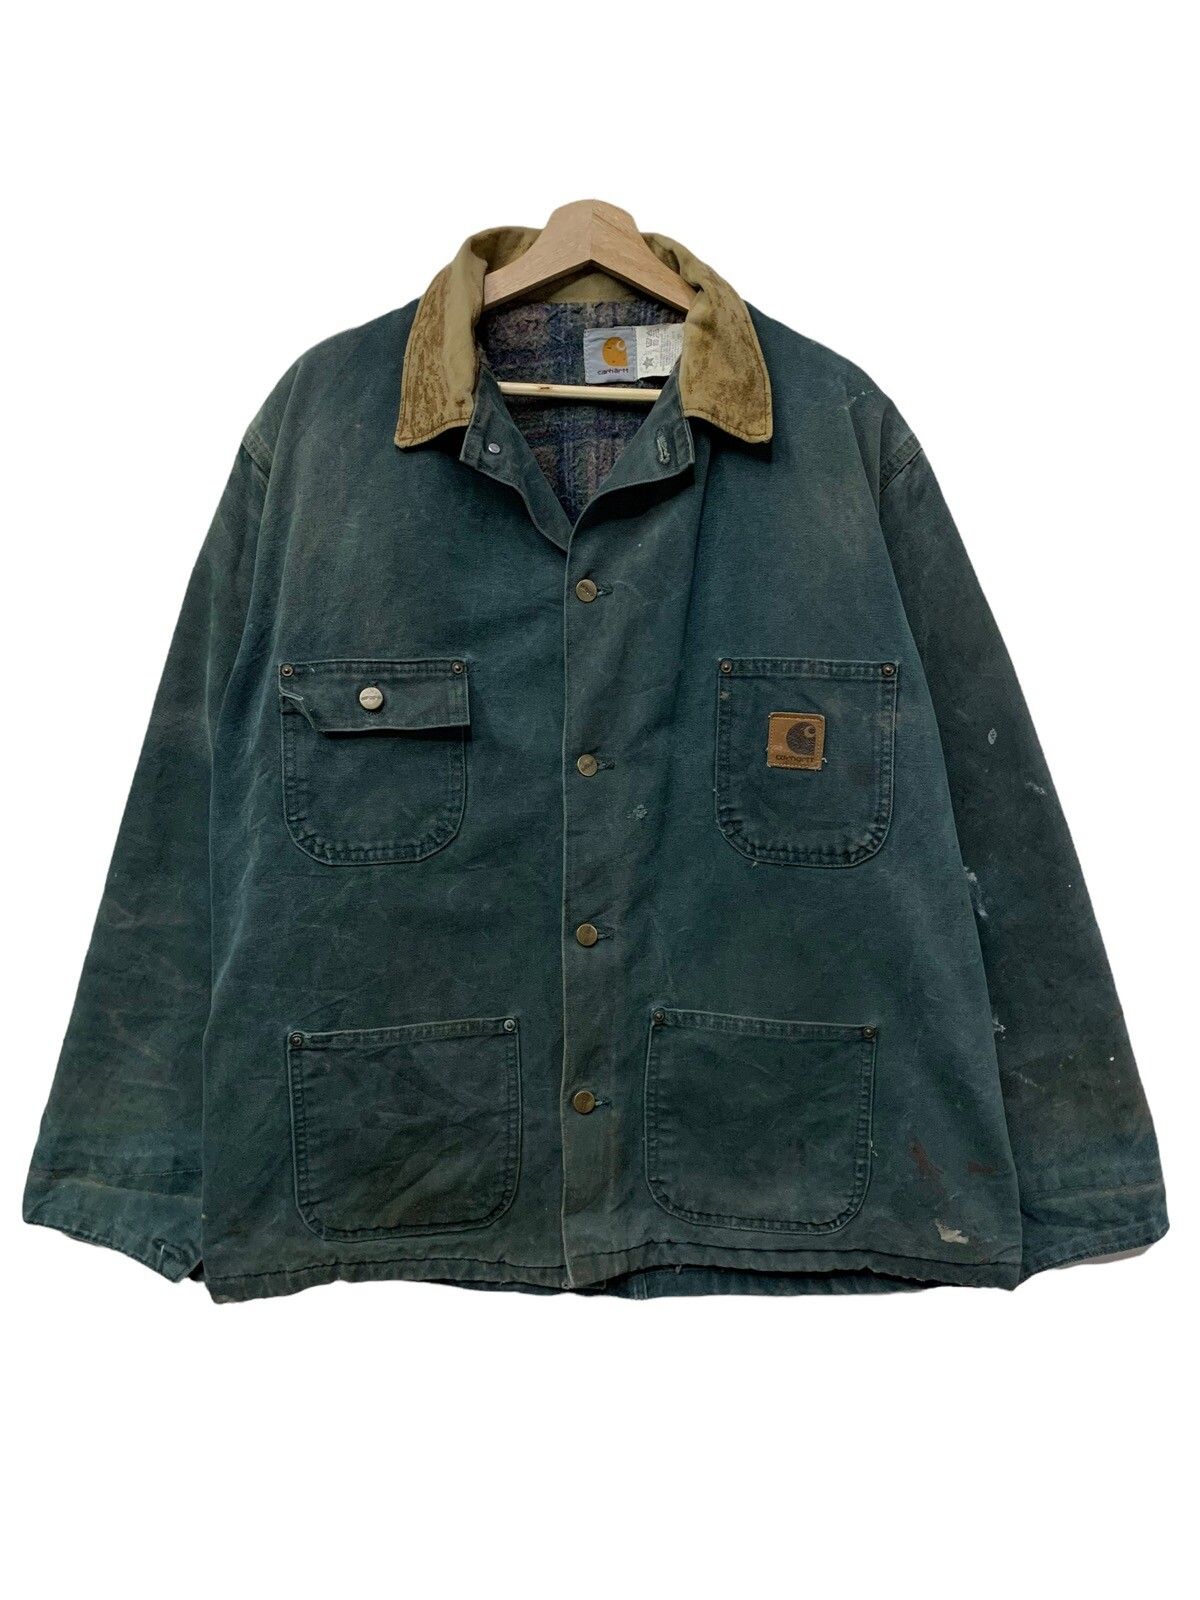 🔥DISTRESSED CARHARTT WORKERS CHORE JACKETS - 3